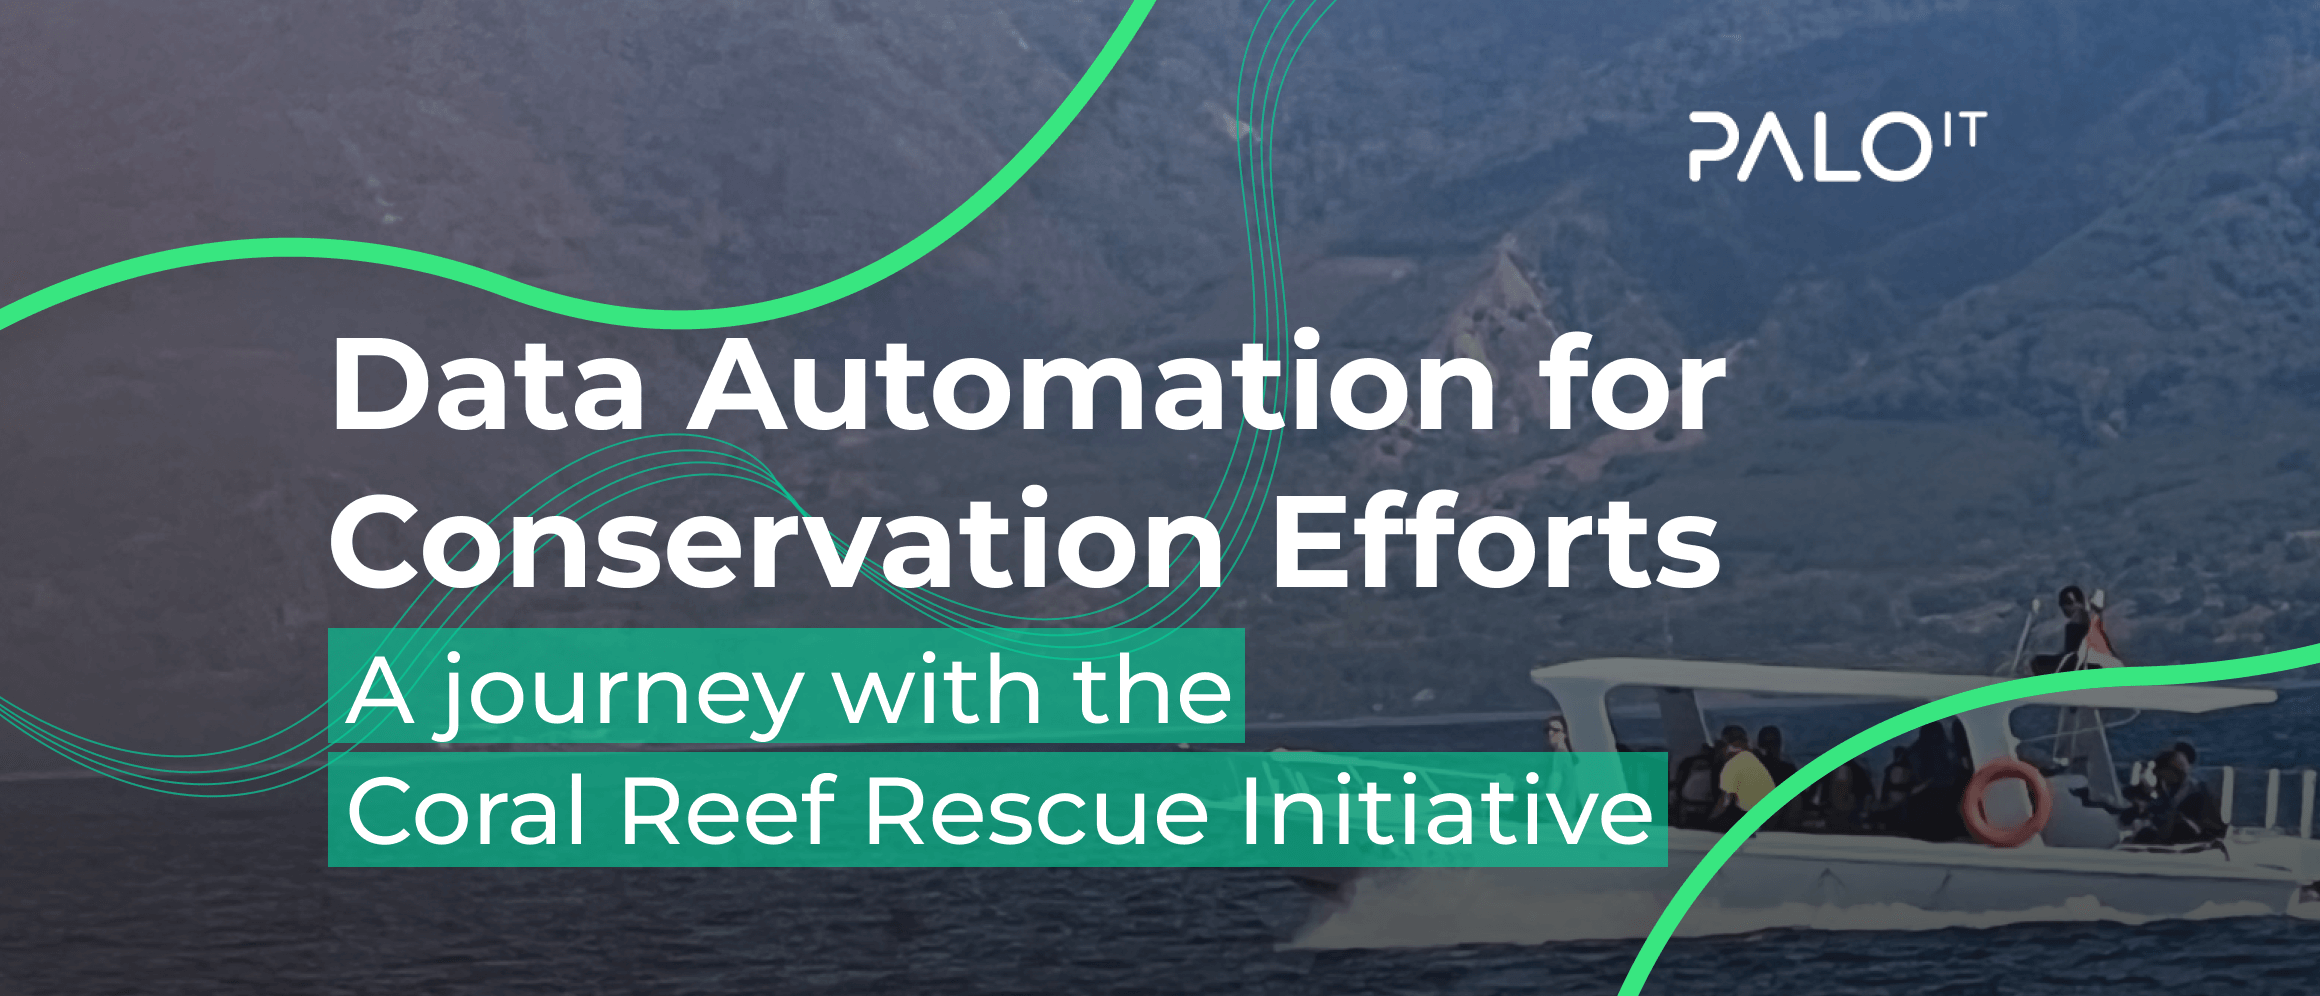 Data Automation: A Journey with the Coral Reef Rescue Initiative